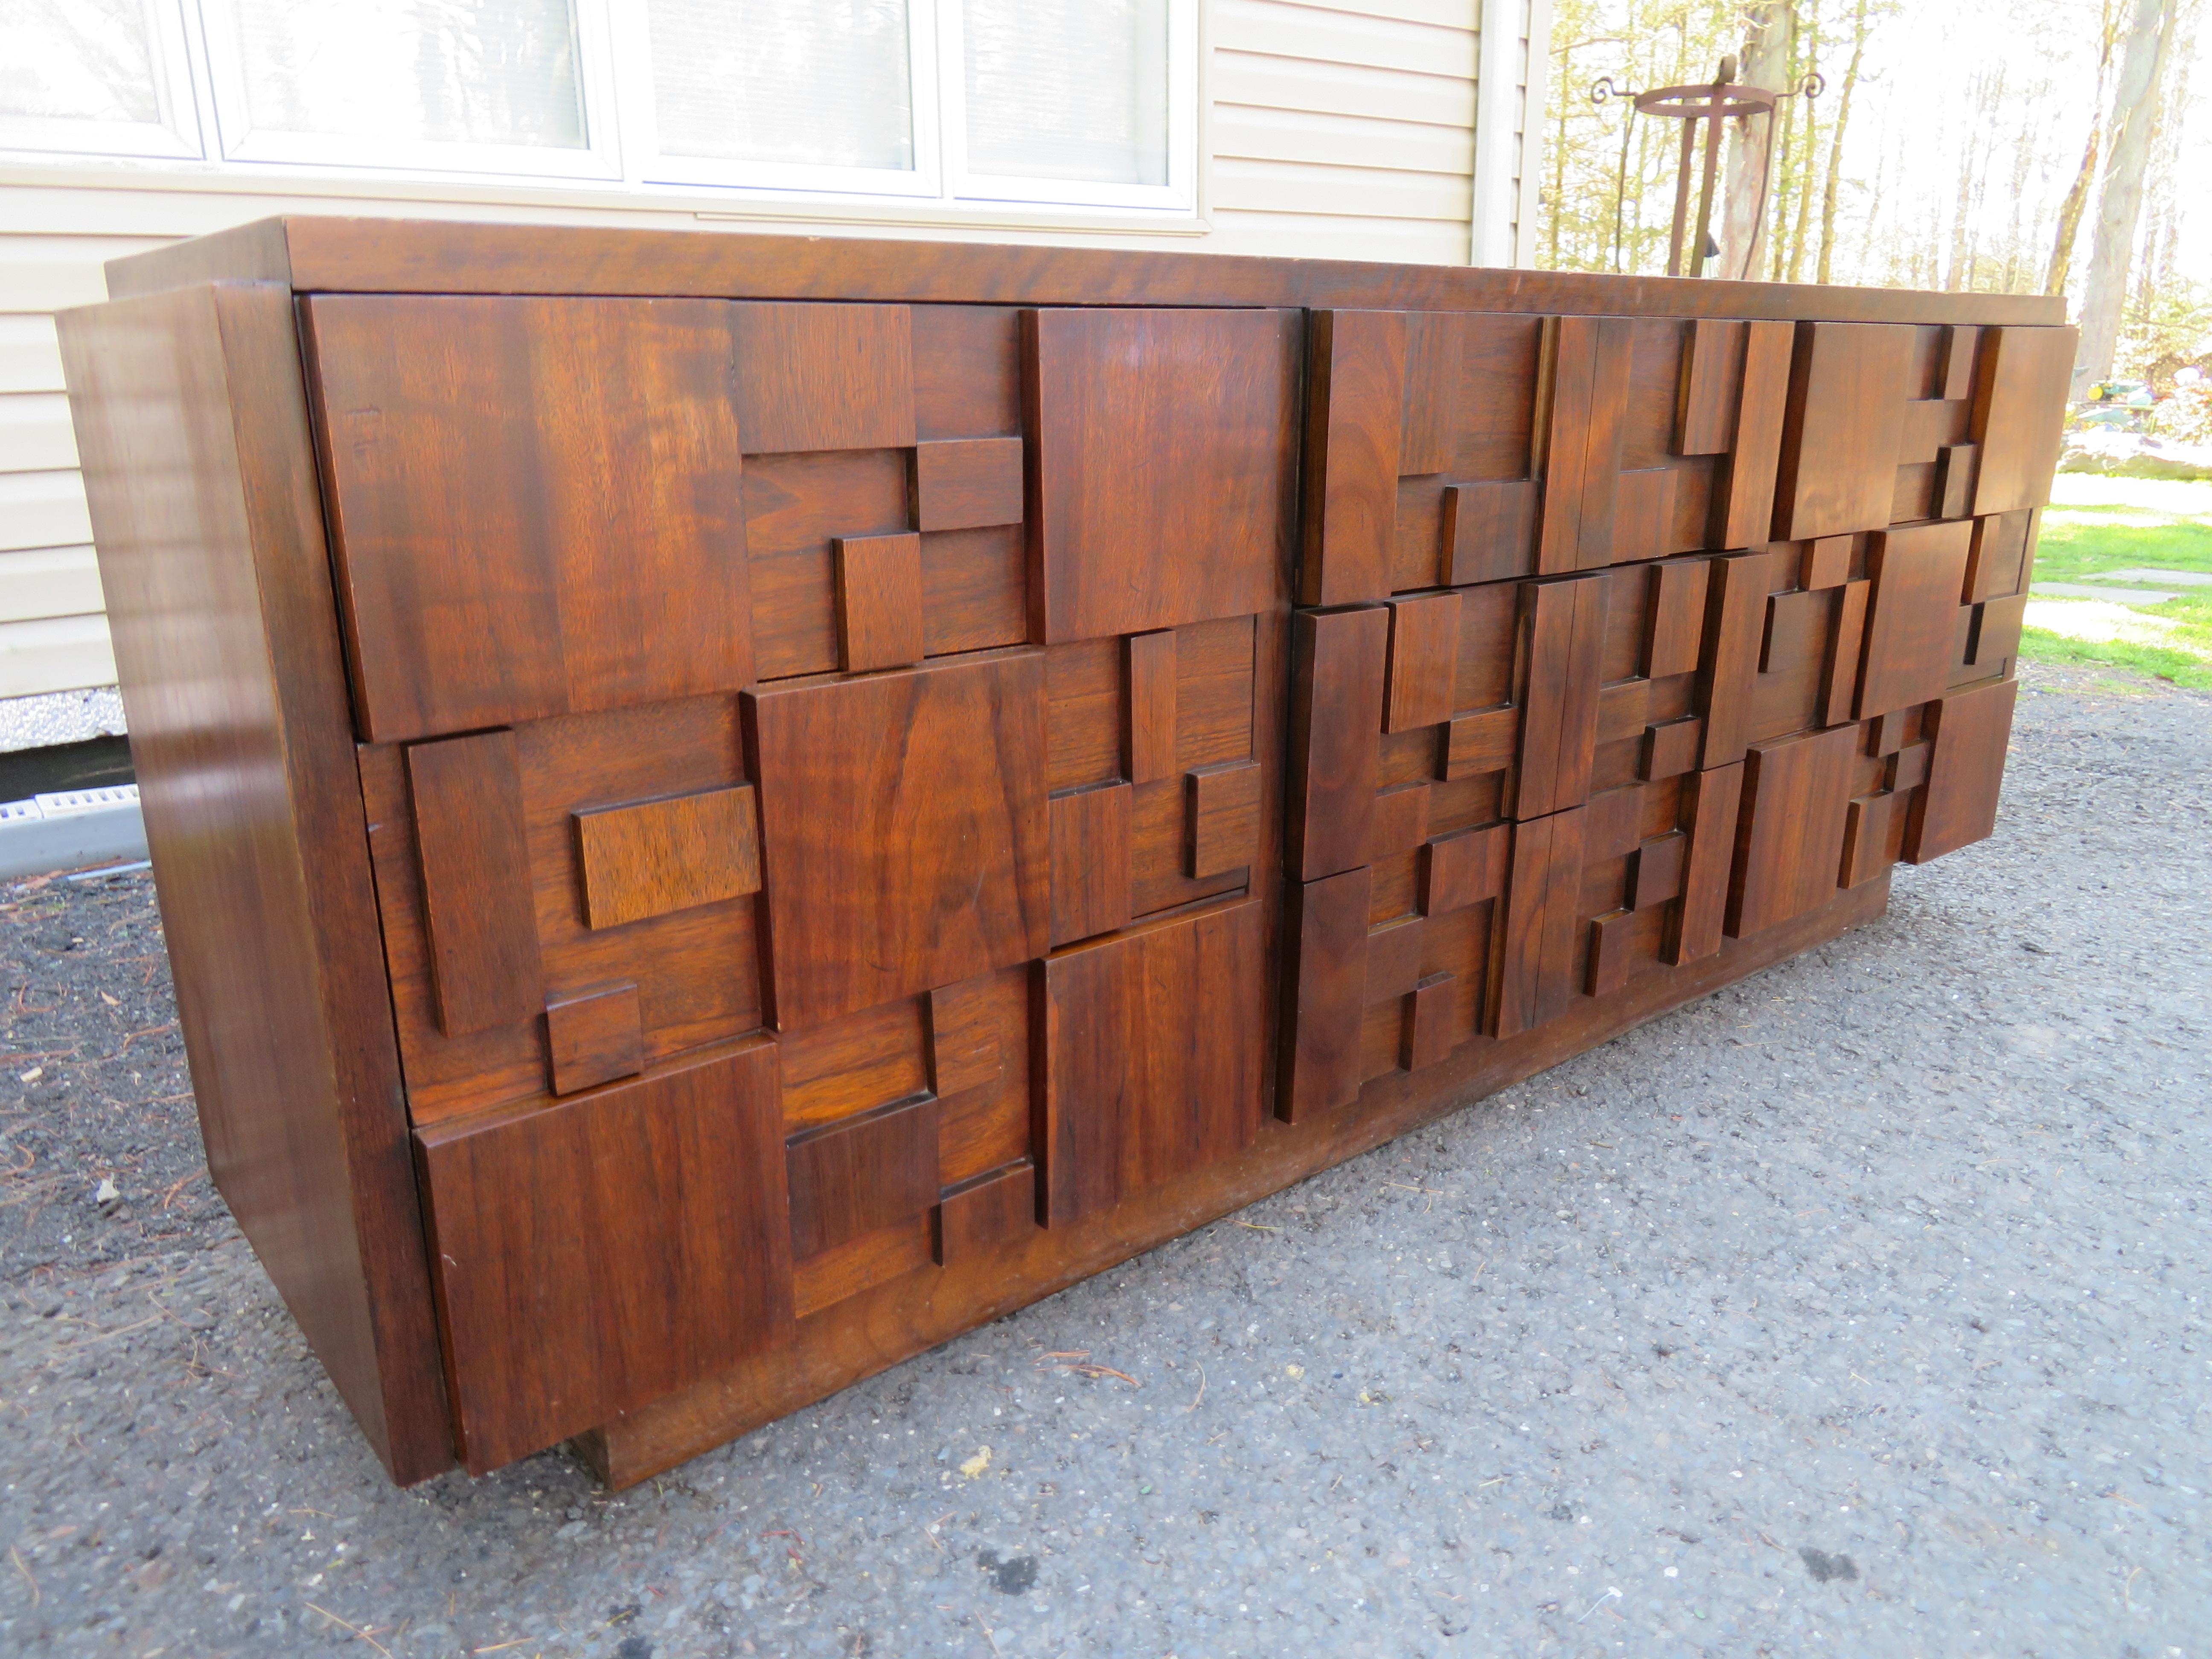 Handsome Paul Evans inspired chunky walnut mosaic credenza made by Lane. This piece is in very nice vintage condition and is very well made. The top has its original finish and looks quite nice. This piece measures 30.5